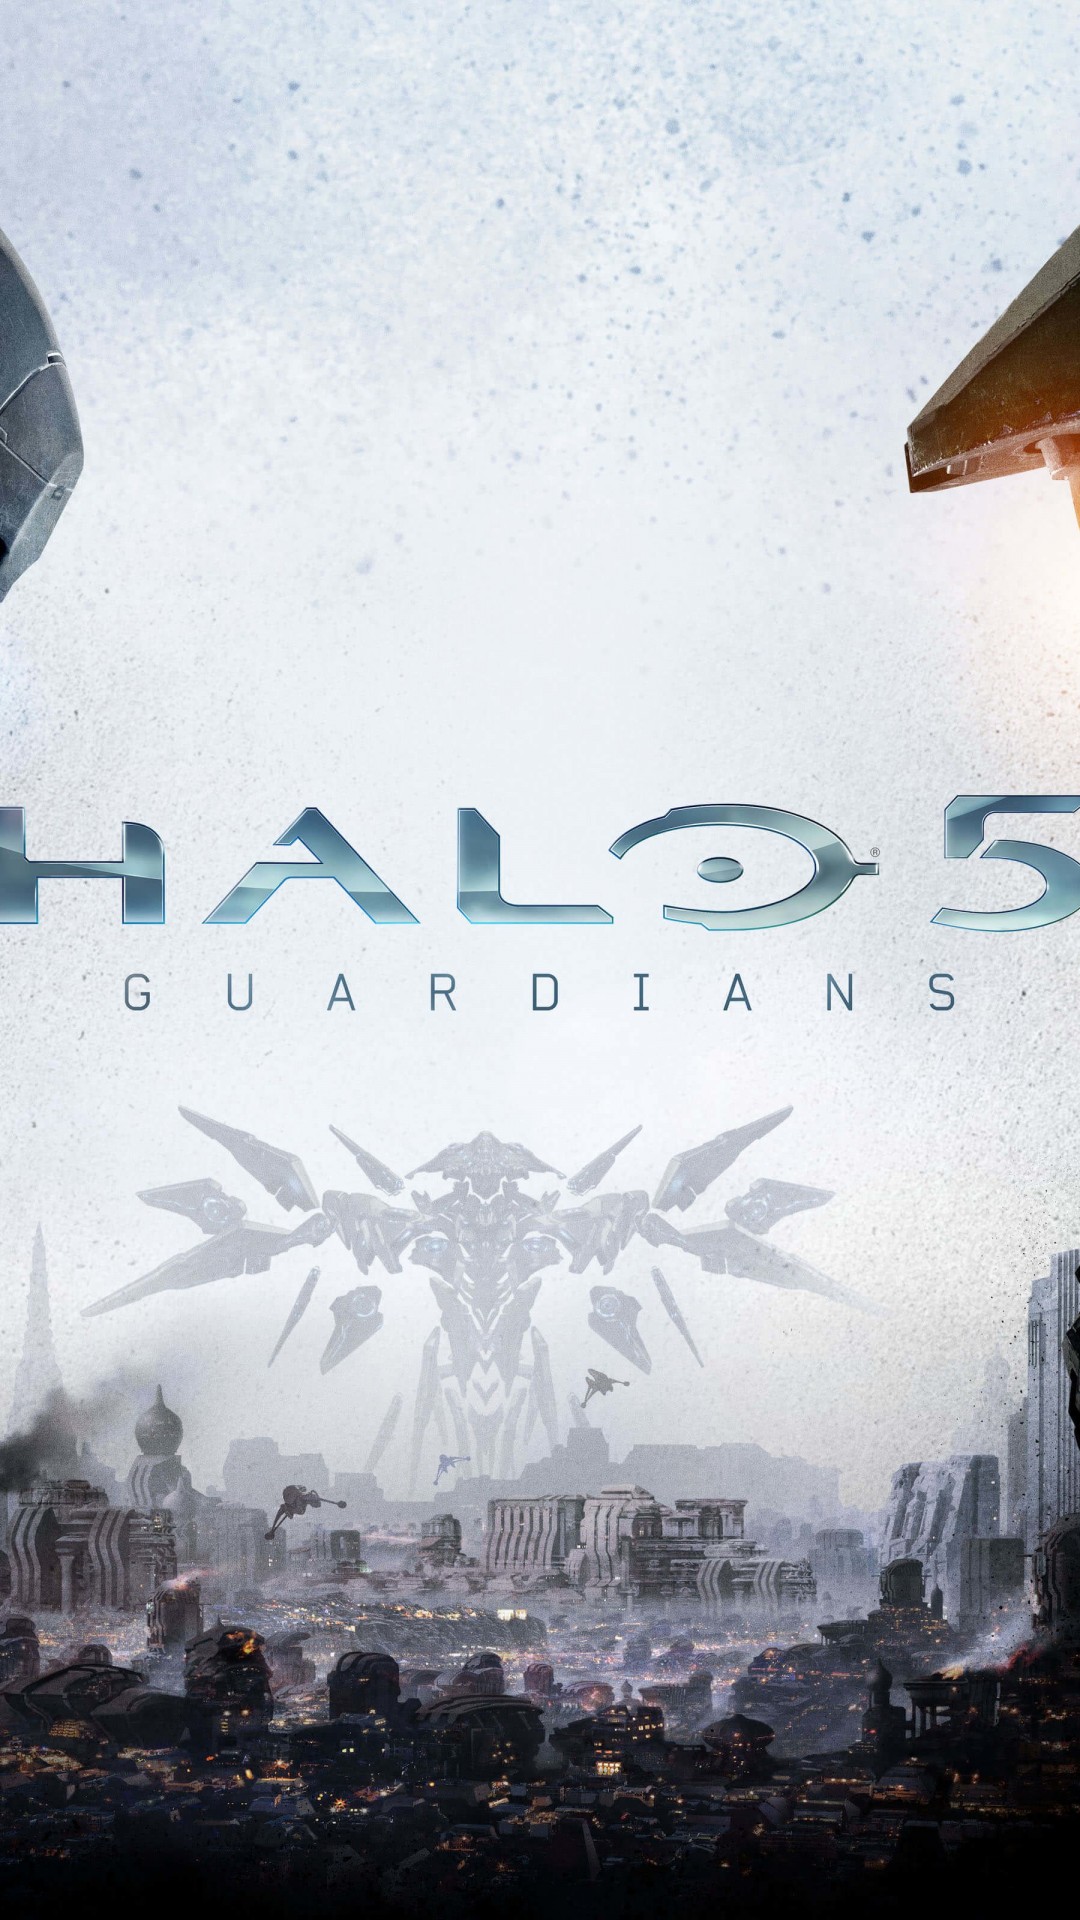 Halo 5: Guardians Wallpaper for SONY Xperia Z3